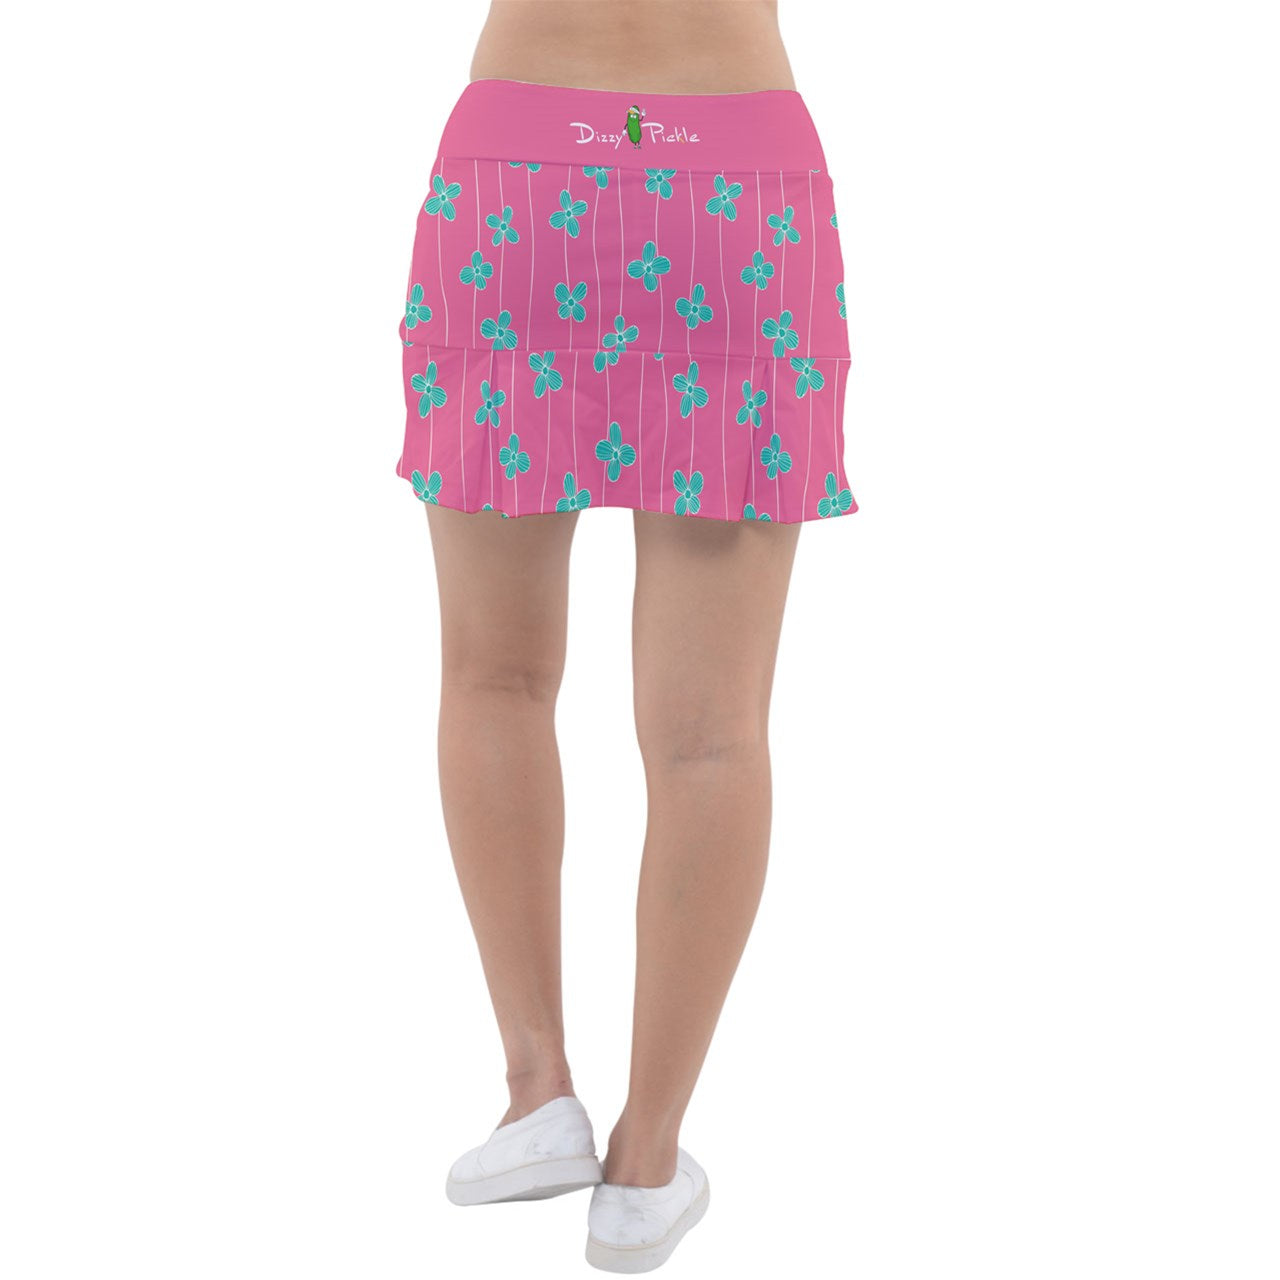 Dizzy Pickle Lesia Blossom PSC Women's Pickleball Classic Skort with Inner Shorts and Pockets